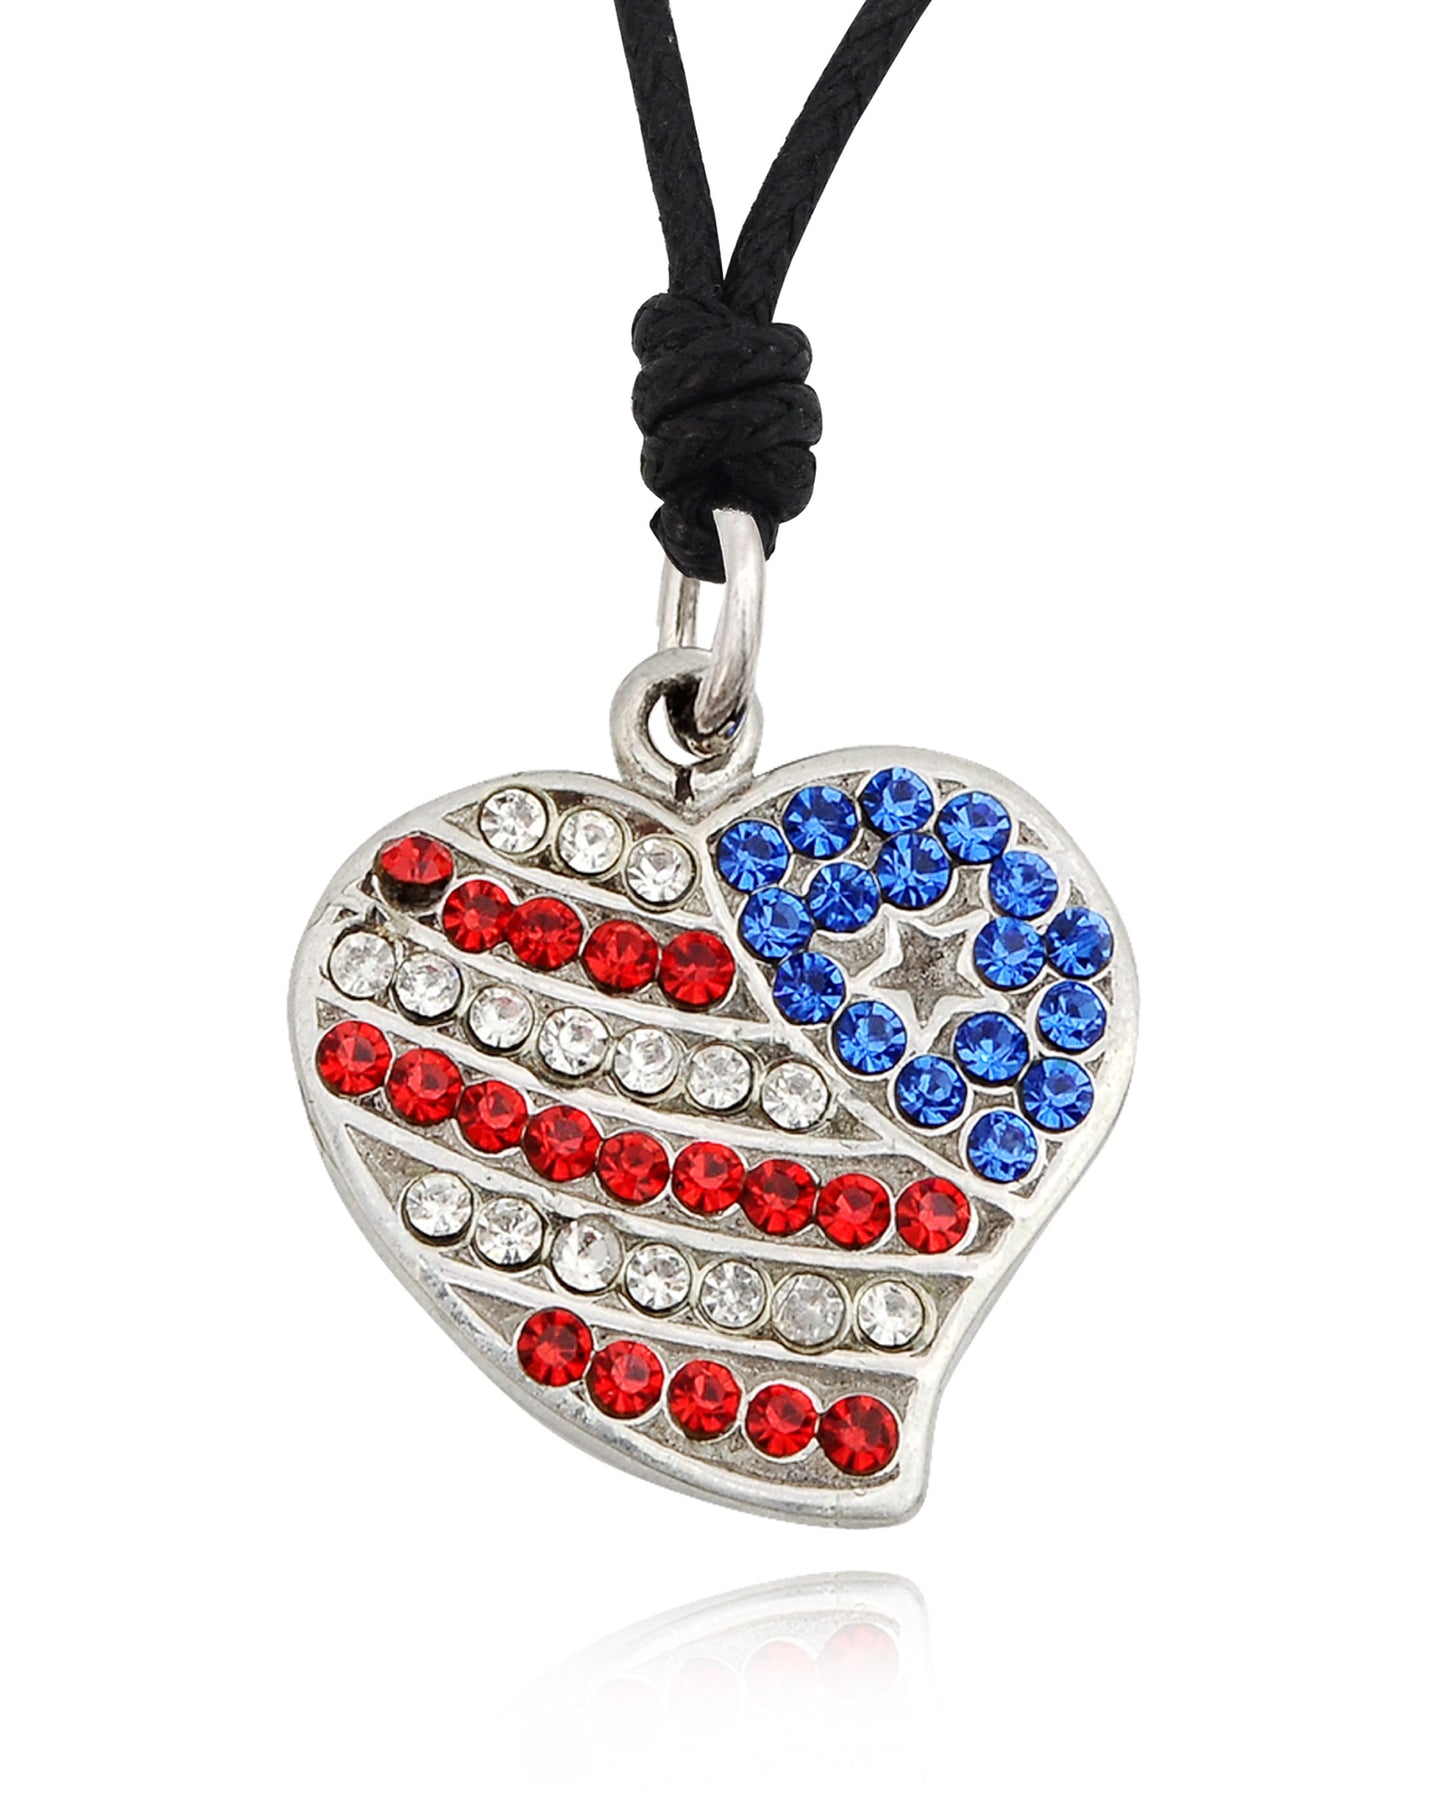 American Sweet Heart Flag Silver Pewter Charm Necklace Pendant Jewelry